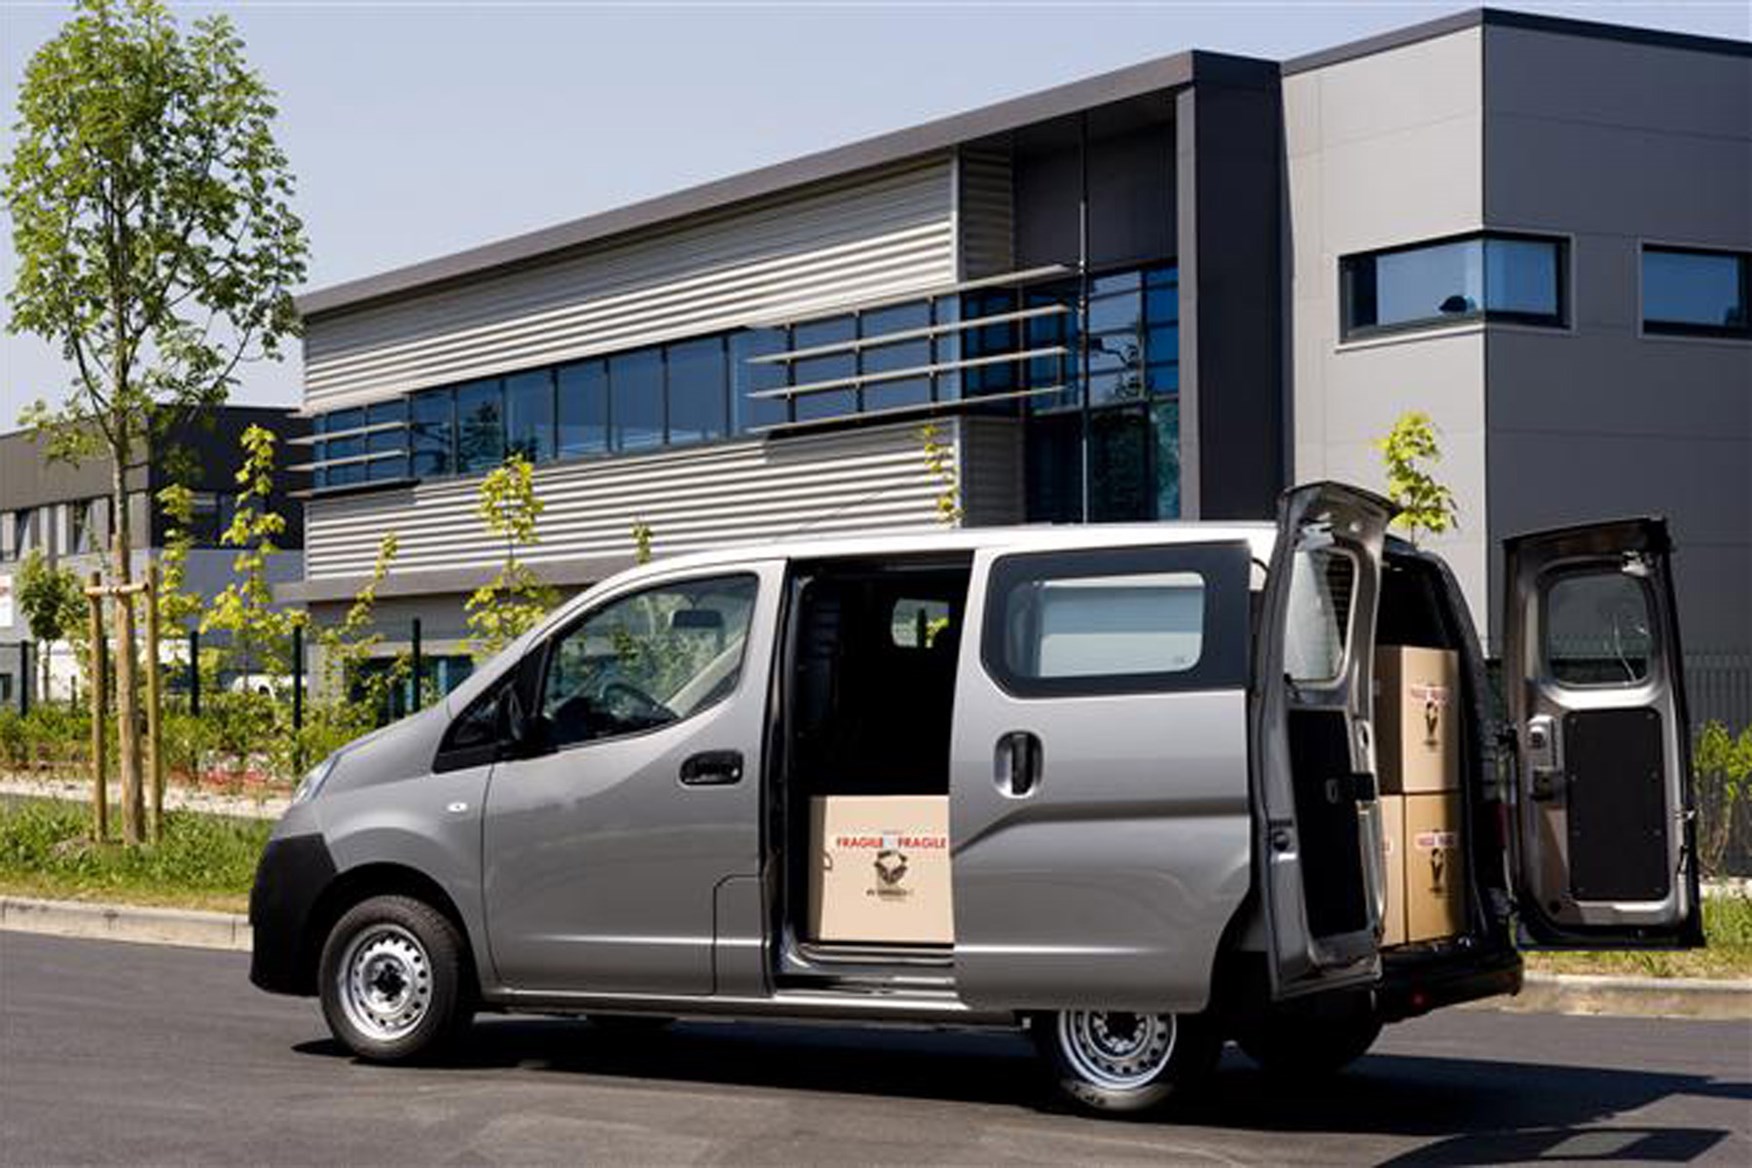 Nissan NV200 full review on Parkers Vans - load area access